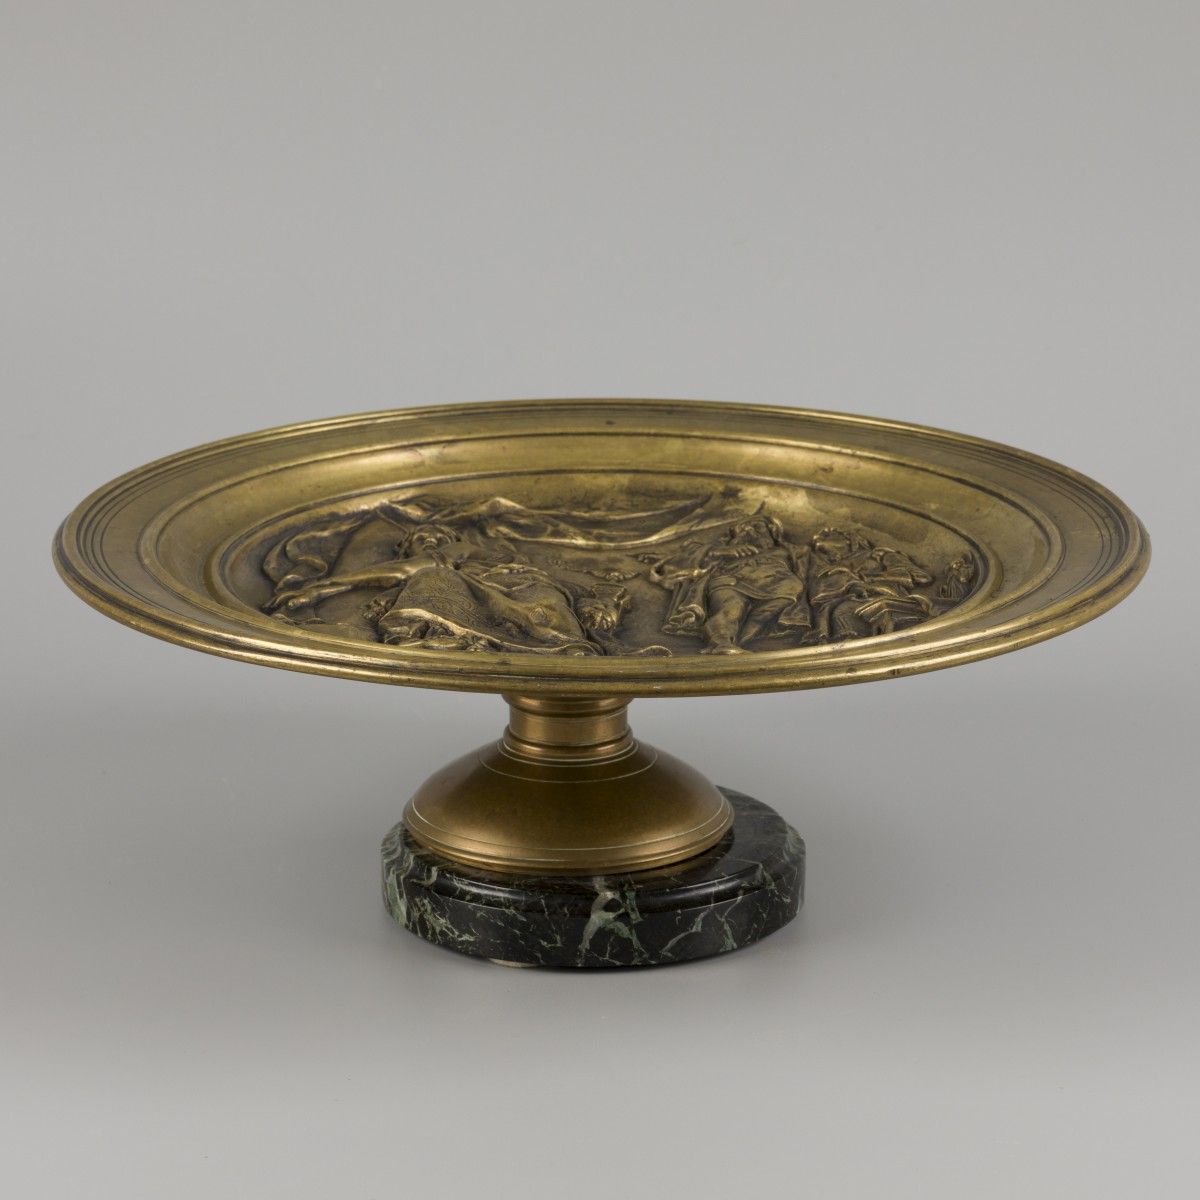 A bronze tazza with decor depicting a scene from 'Macbeth', England, ca. 1930. M&hellip;